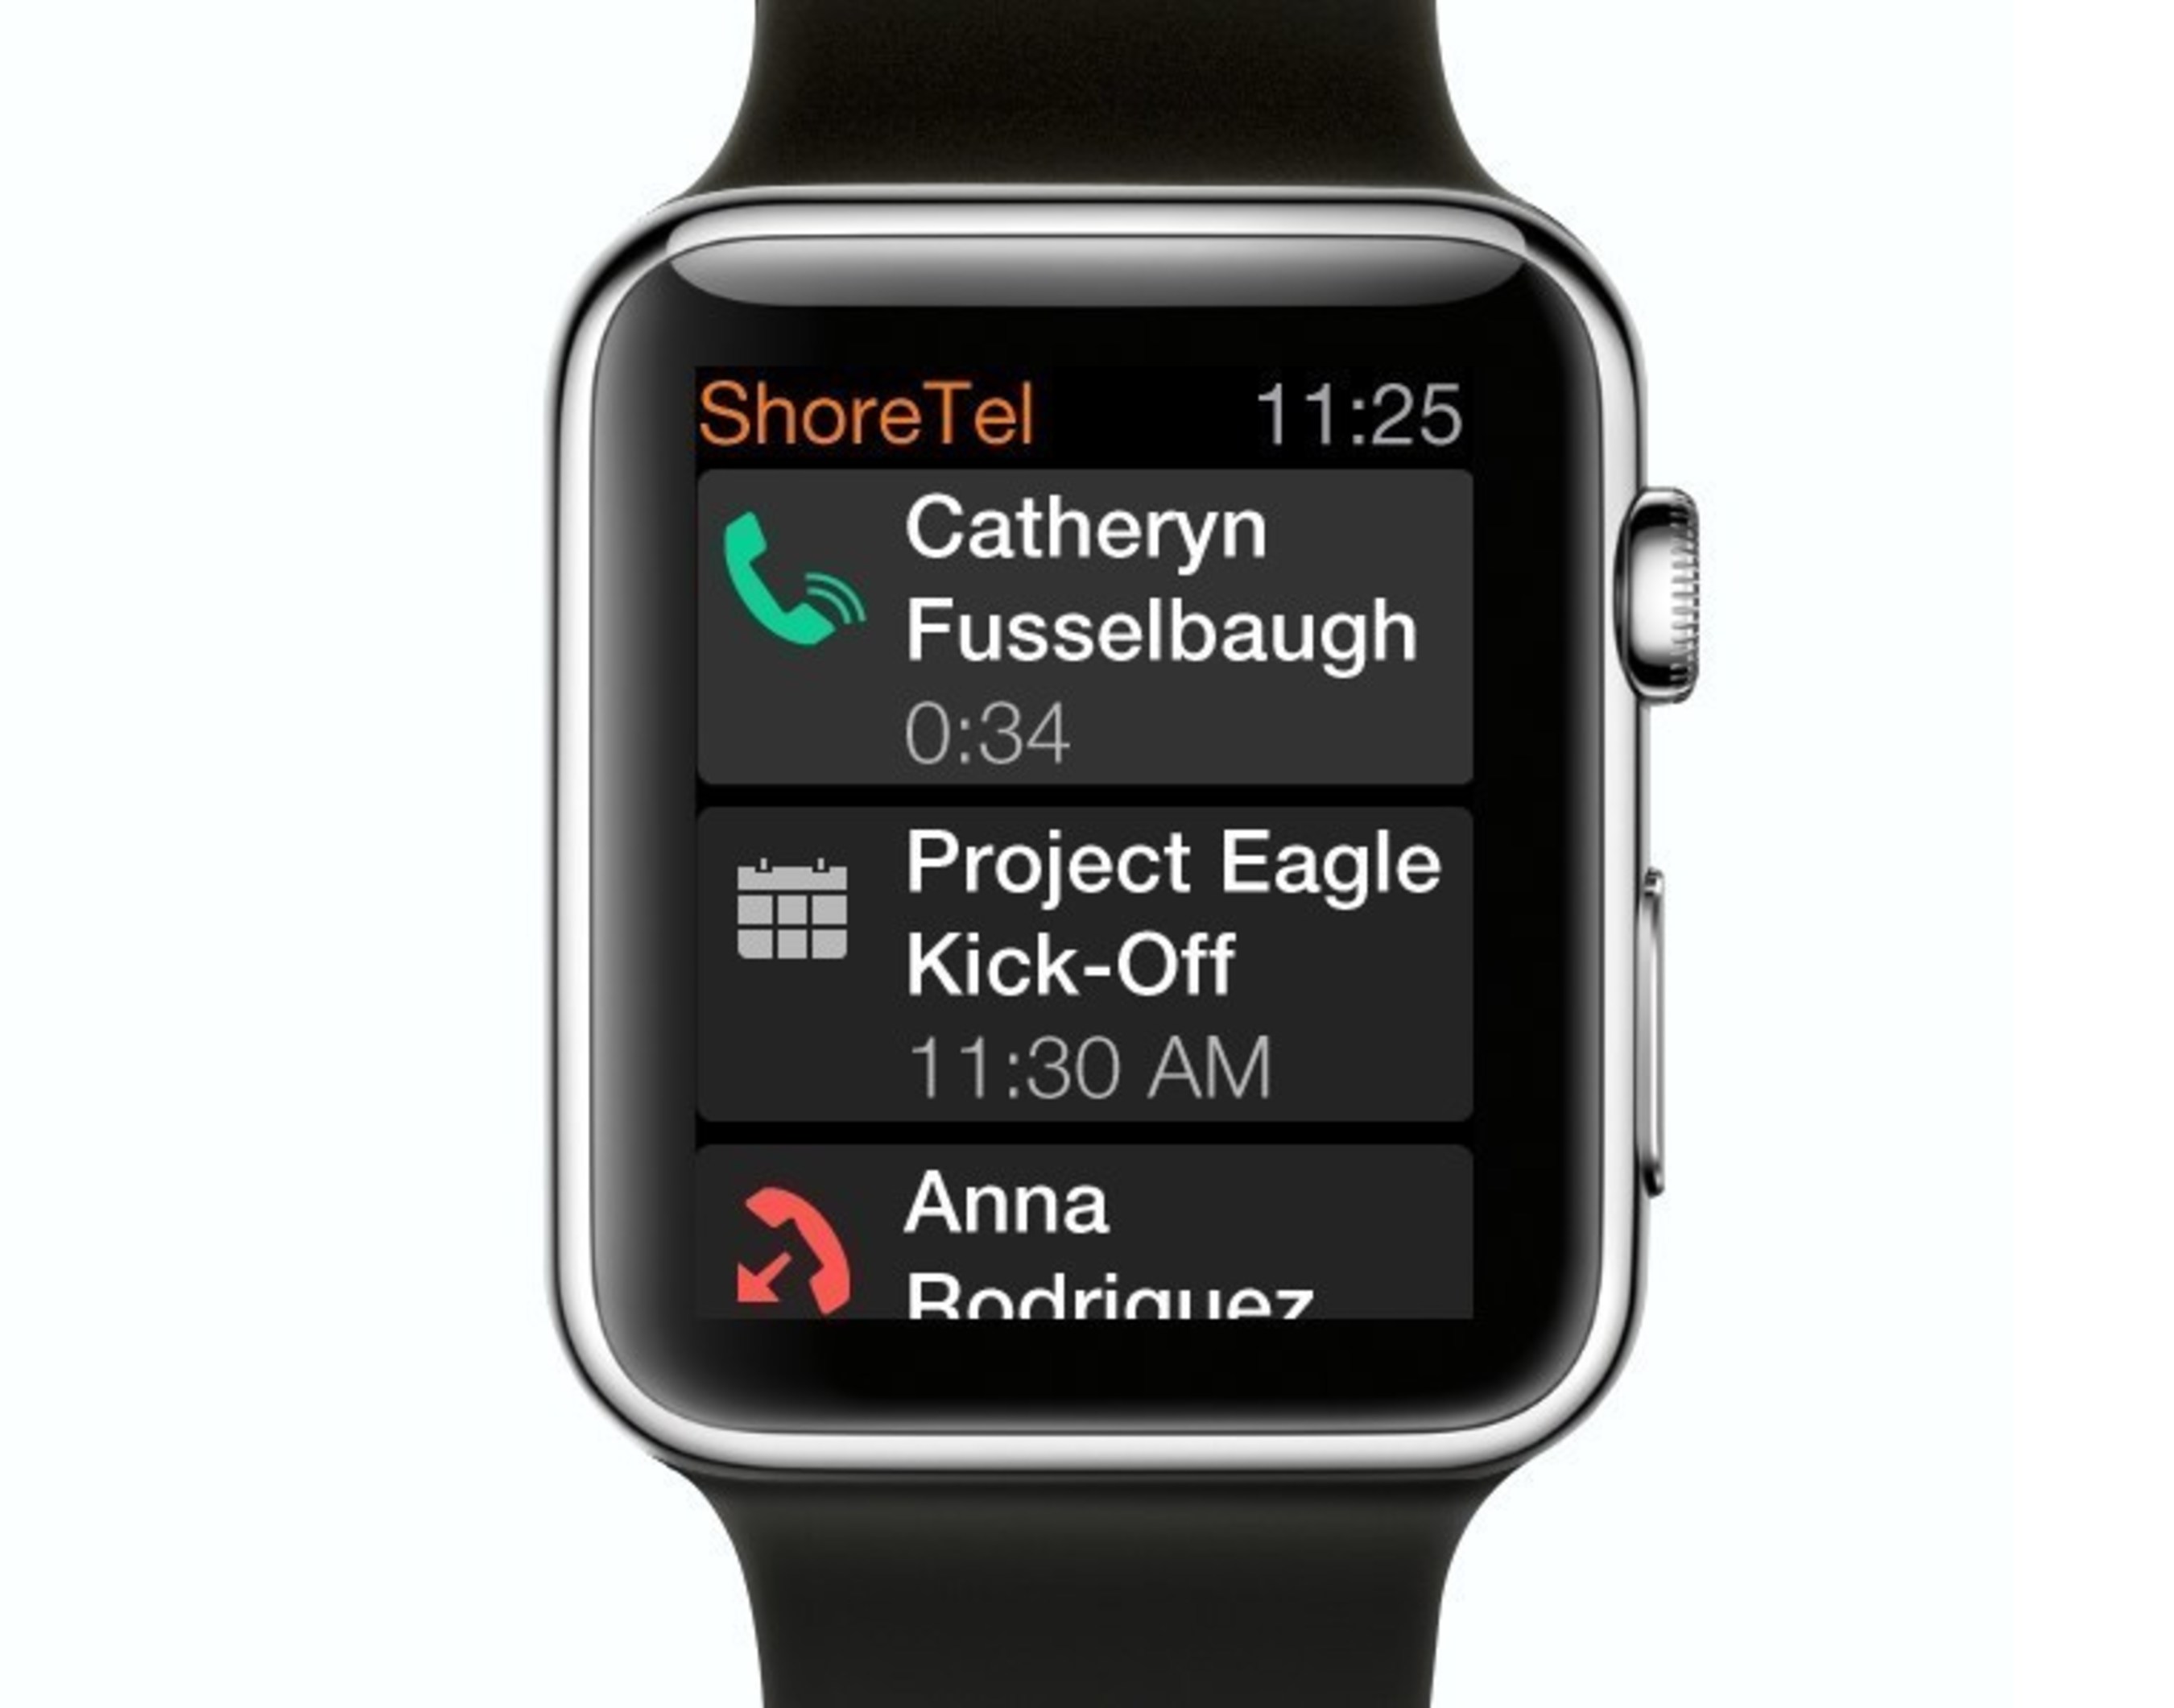 ShoreTel Mobility is one of the first unified communications applications available for the Apple Watch, bringing productivity-boosting features to the wrist.